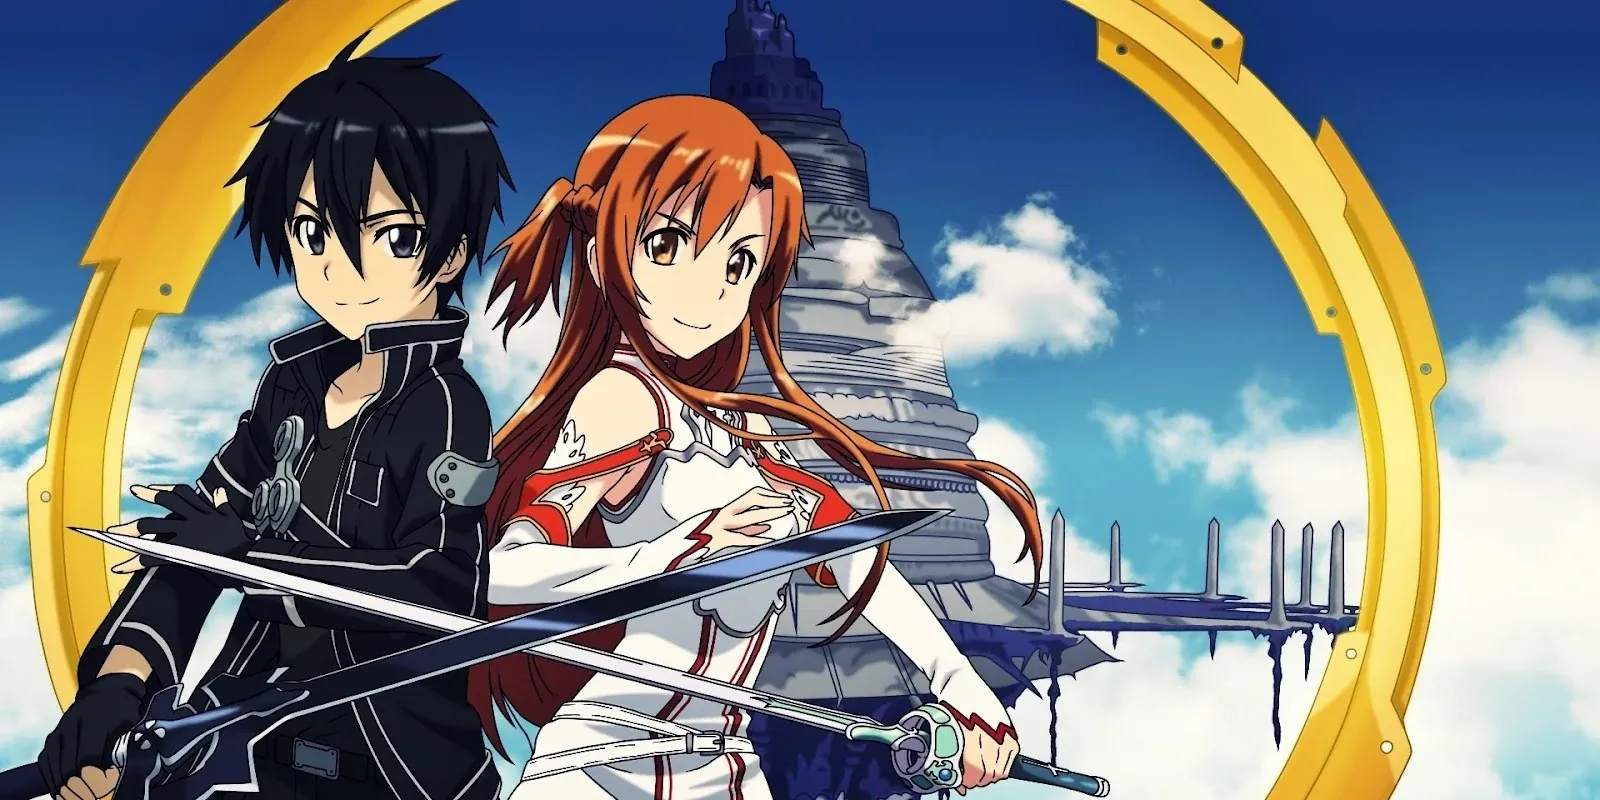 Kirito and Asuna posing with their weapons with Aincrad behind them in Sword Art Online.